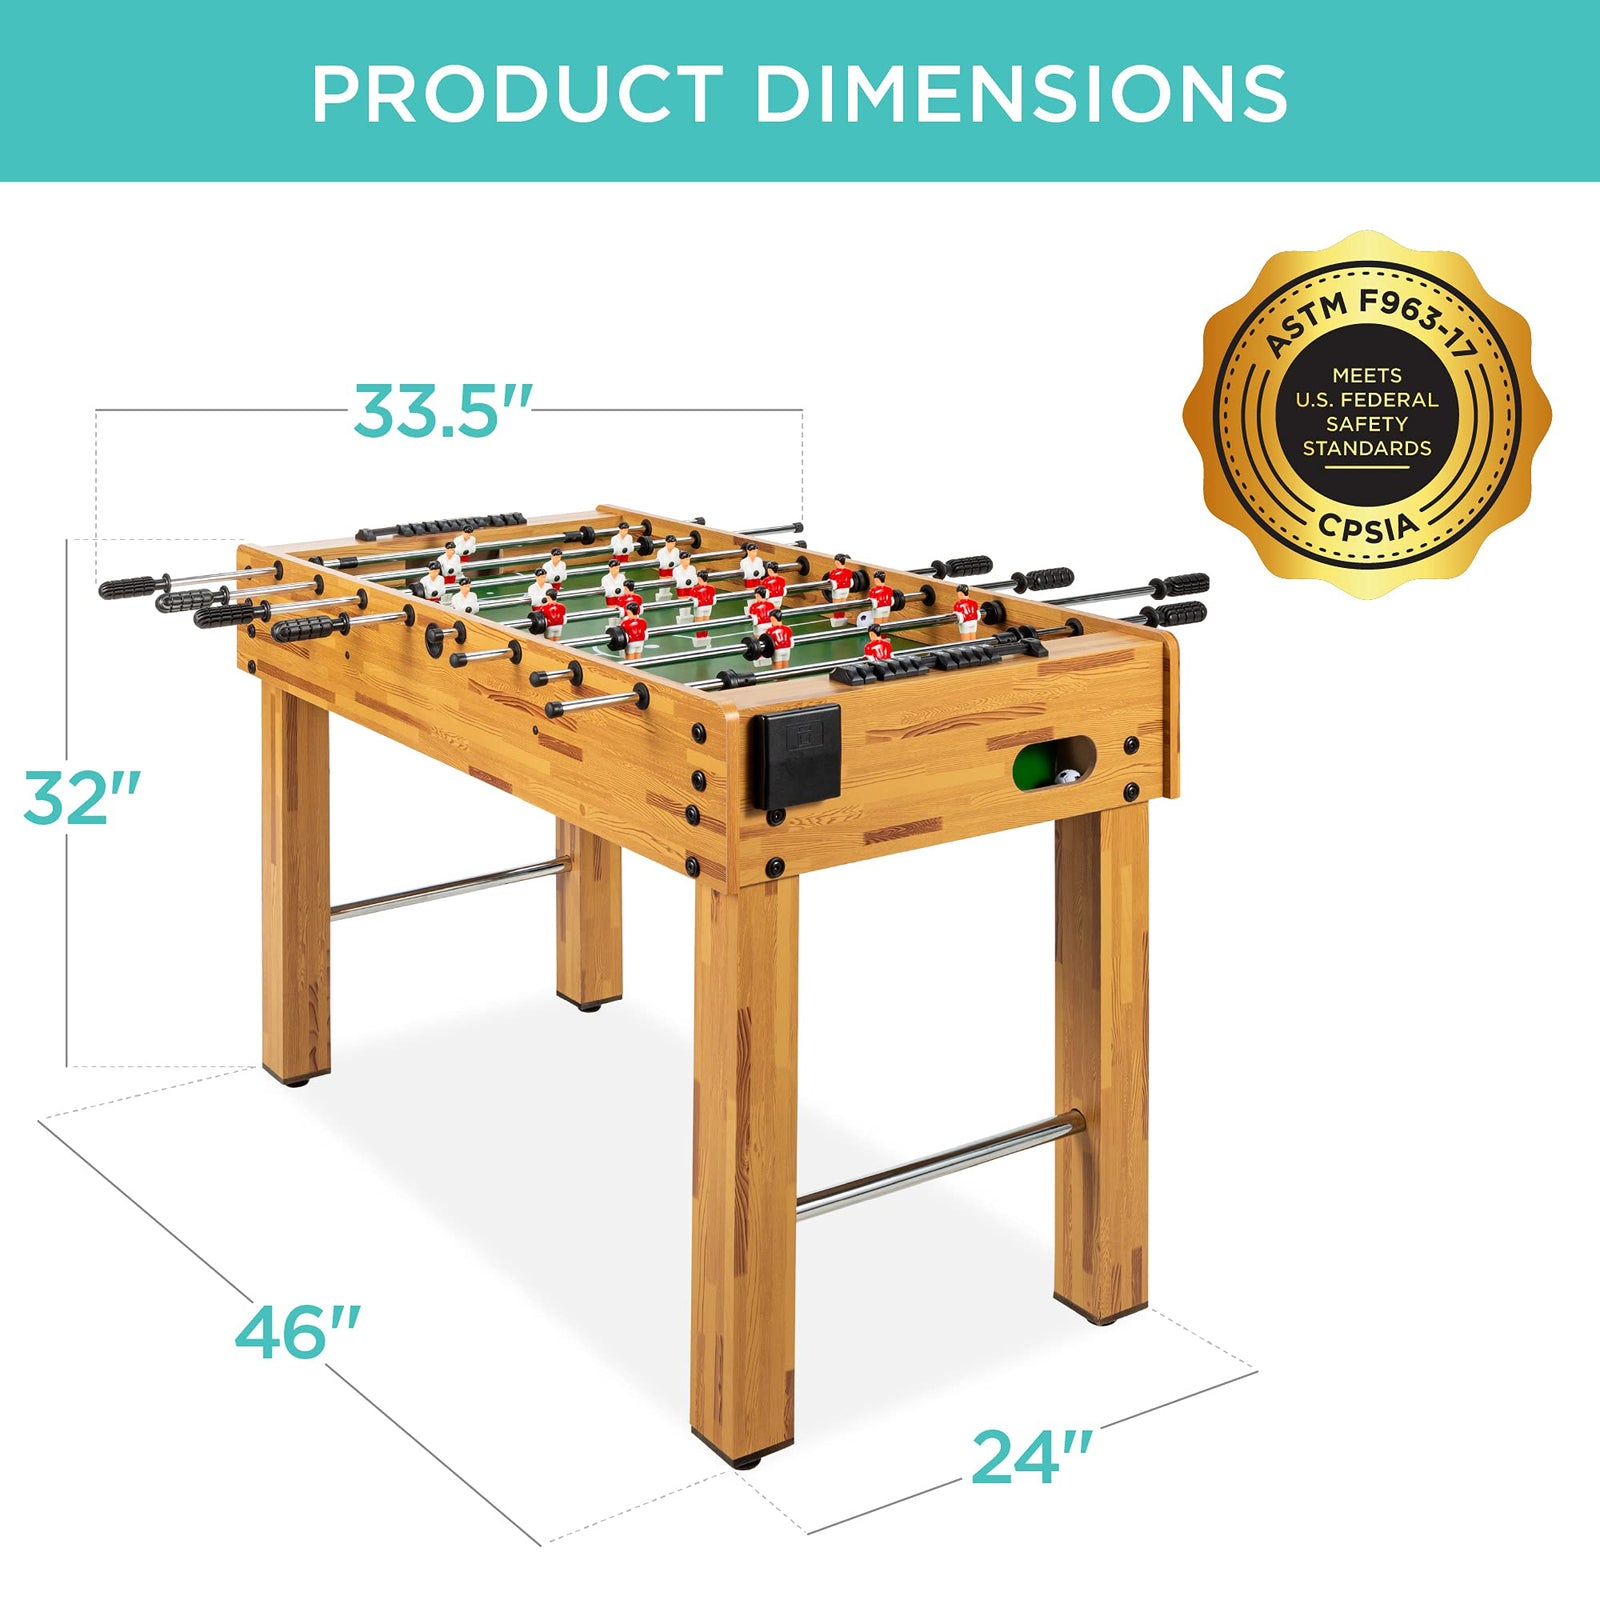 Best Choice Products 48in Competition Sized Foosball Table, Arcade Table Soccer for Home, Game Room, Arcade w/ 2 Balls, 2 Cup Holders